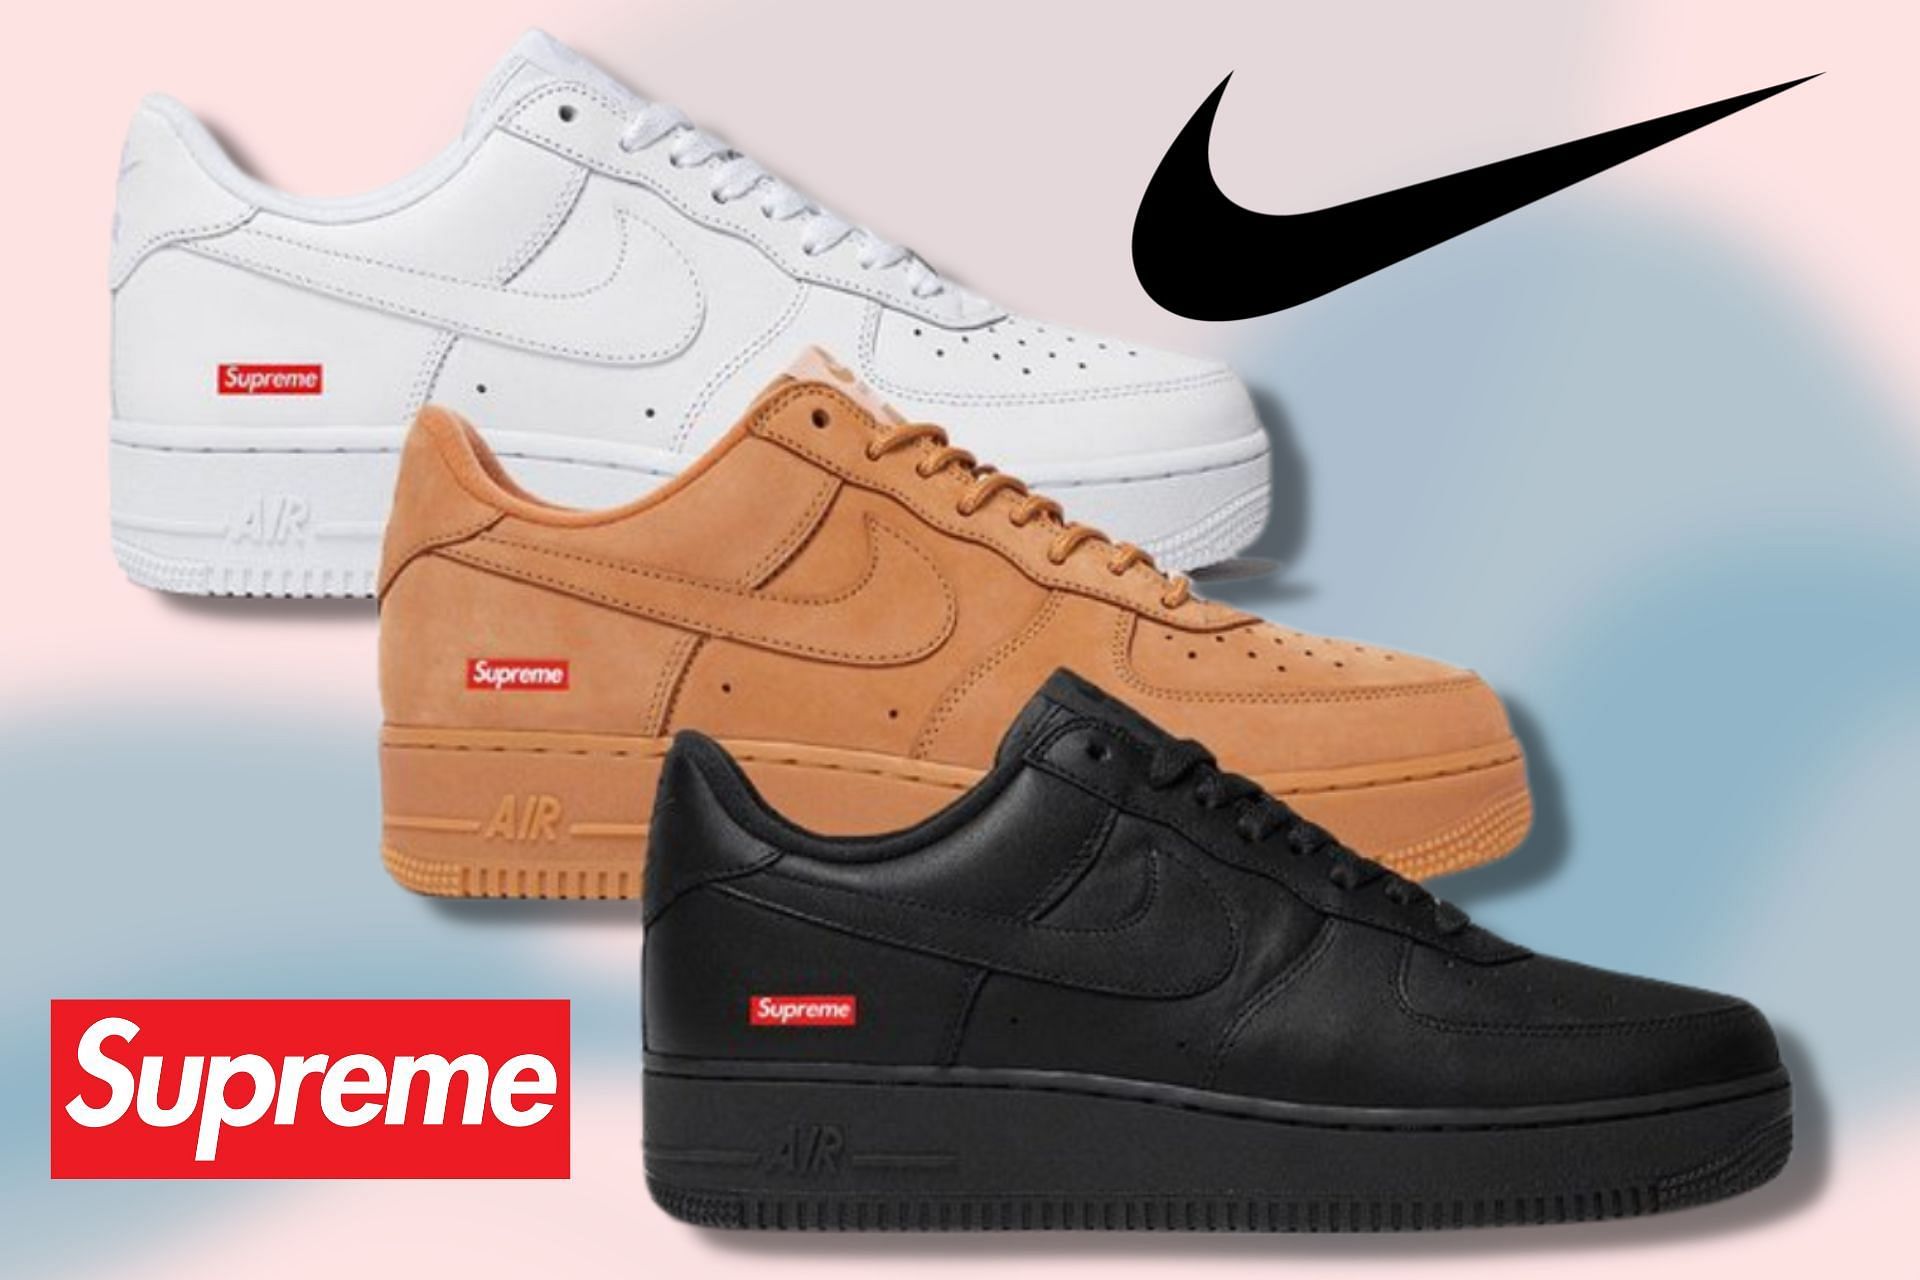 Supreme x Nike Air Force 1 Low footwear collection (Image via Nike)